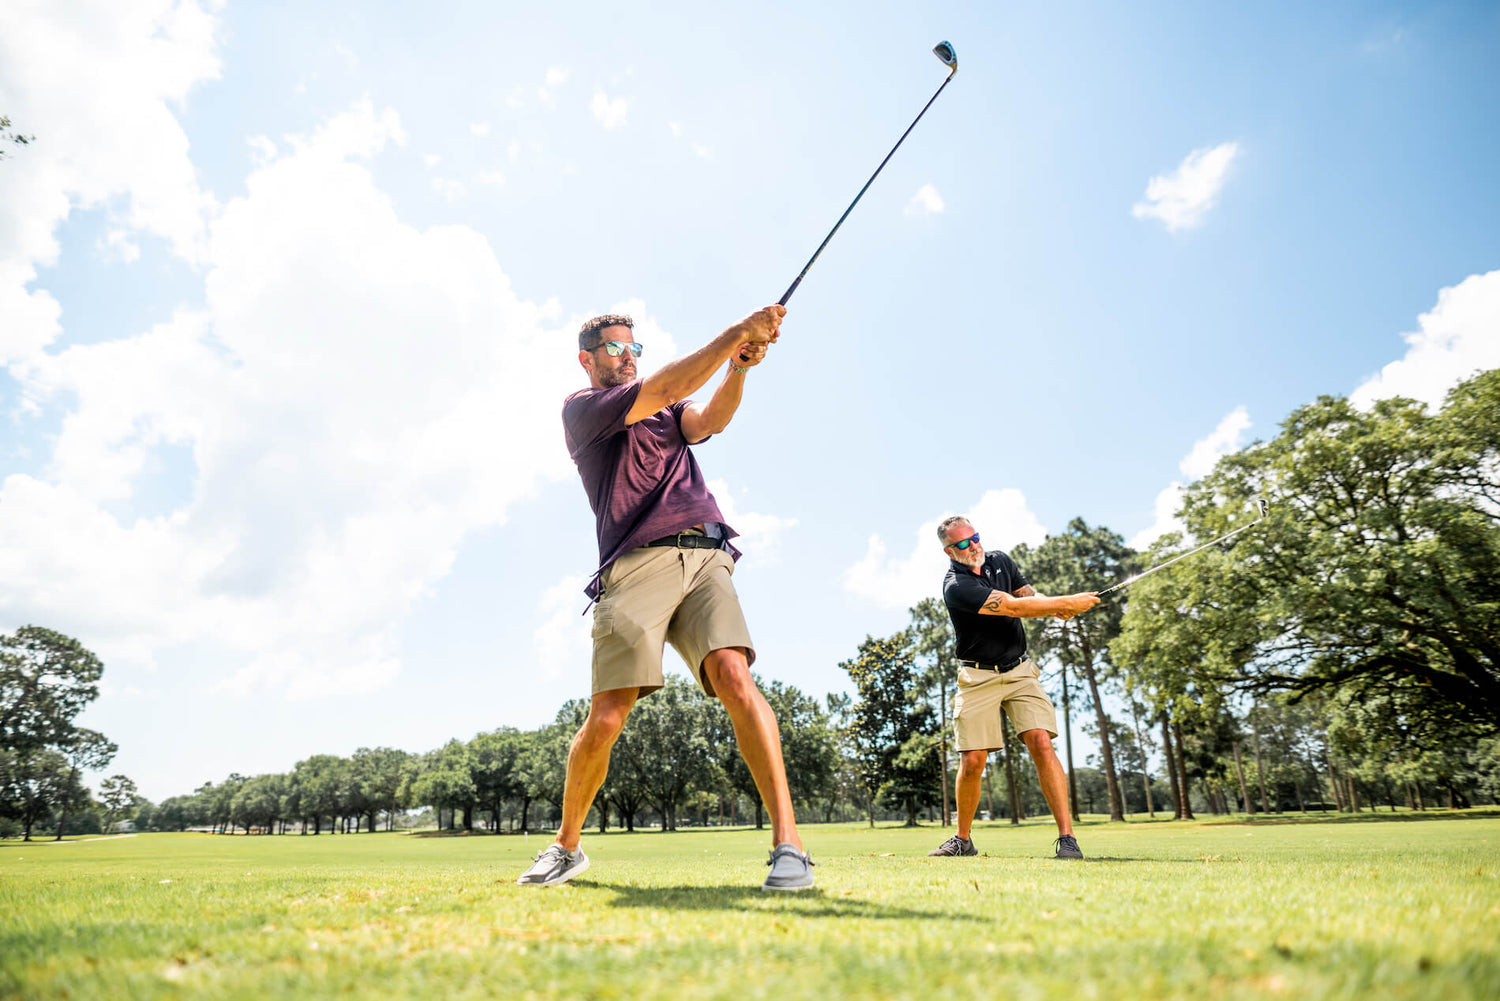 Two men on golf course swinging clubs, each wearing MSC Stretch Fit Shorts in Oyster and dark polos